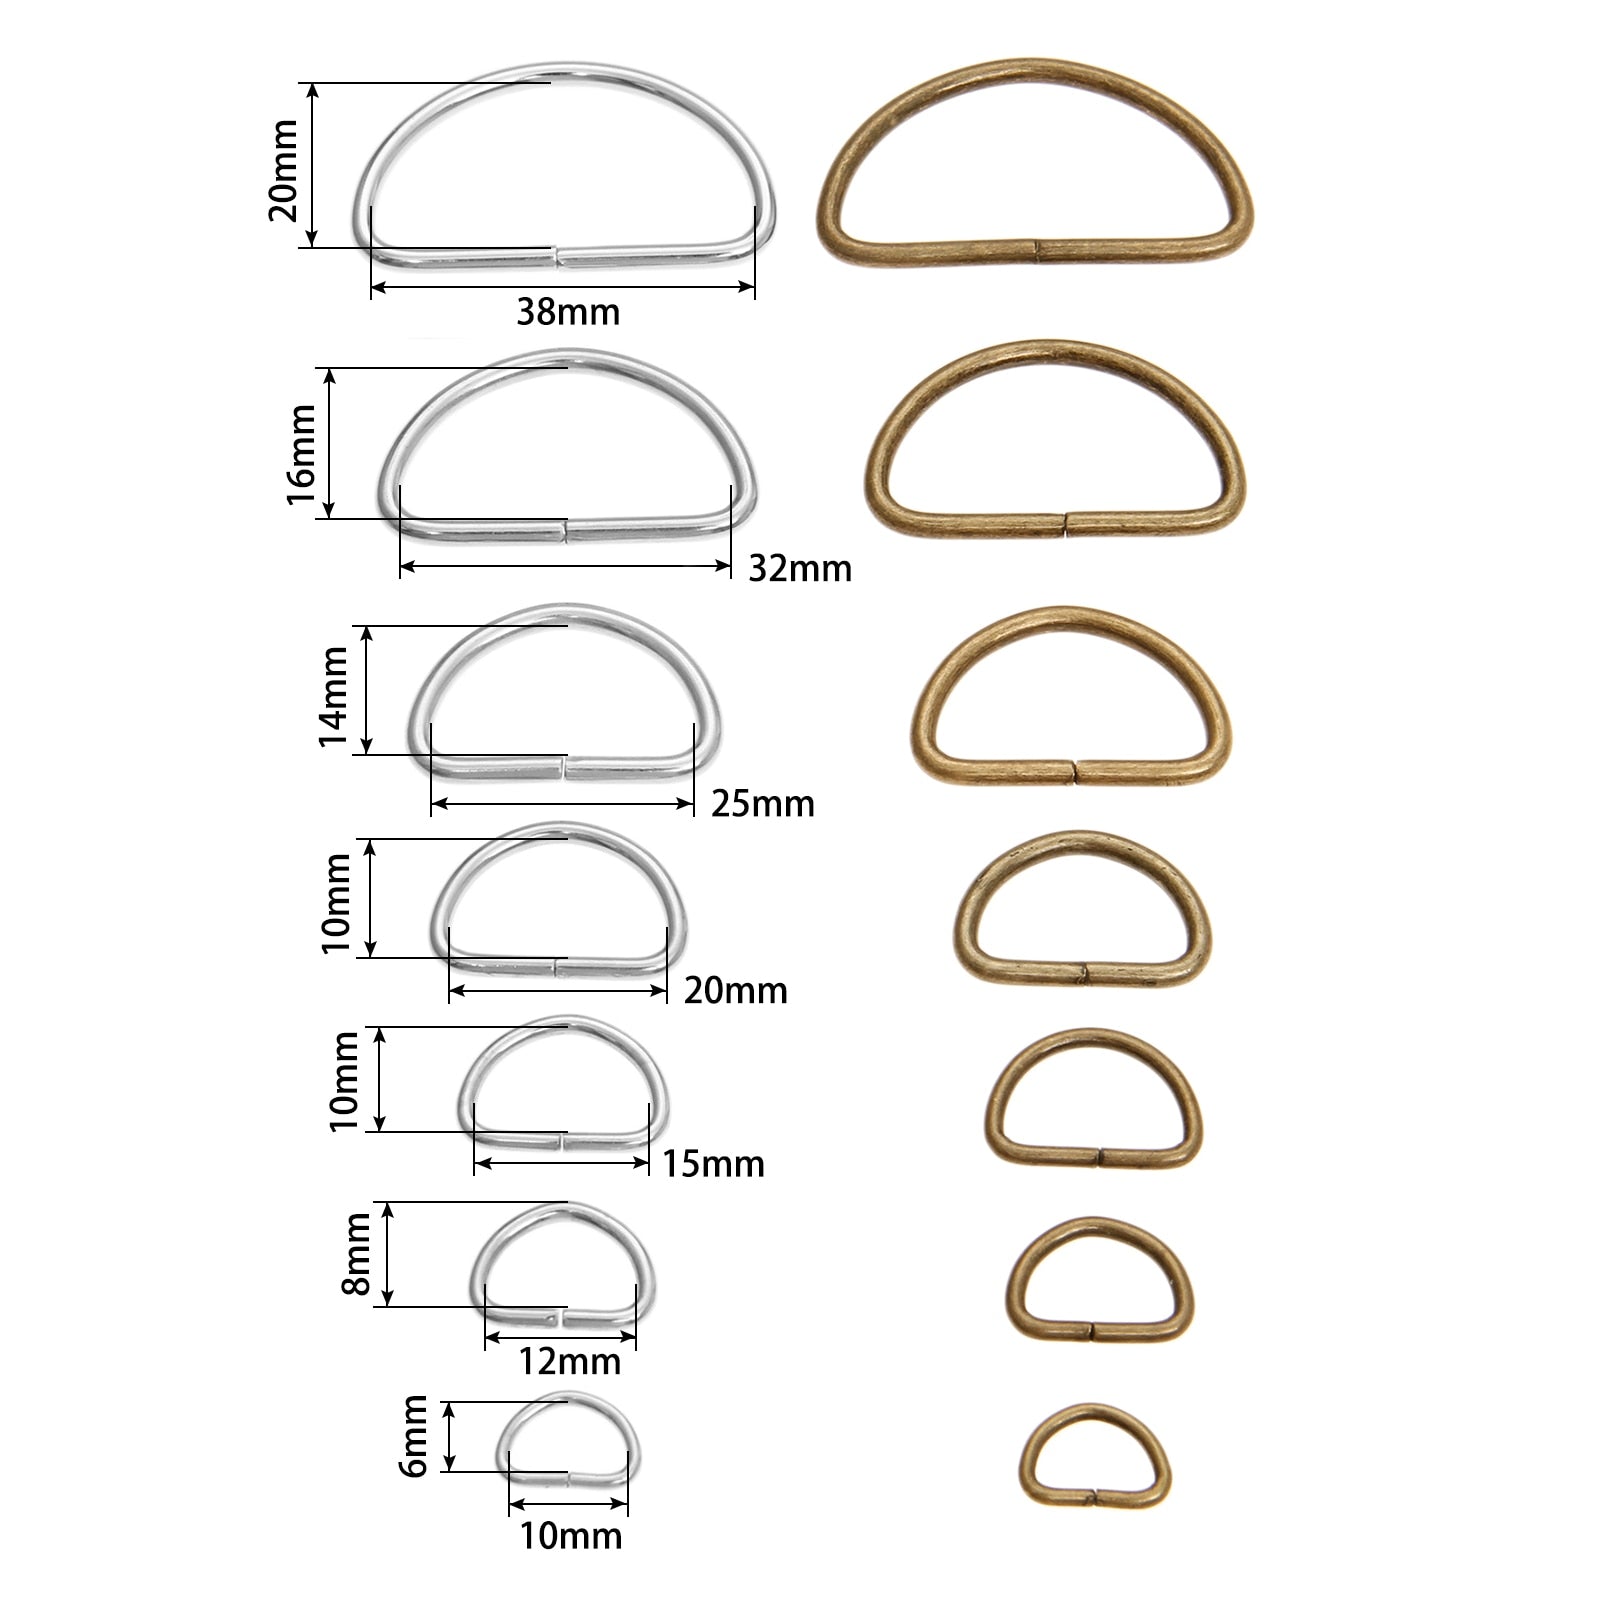 20pcs/lot Metal D Ring Buckle Hand Bag Purse Strap Belt Dog Collar Chain Clasp DIY Needlework Heavy Duty Strong Thickness